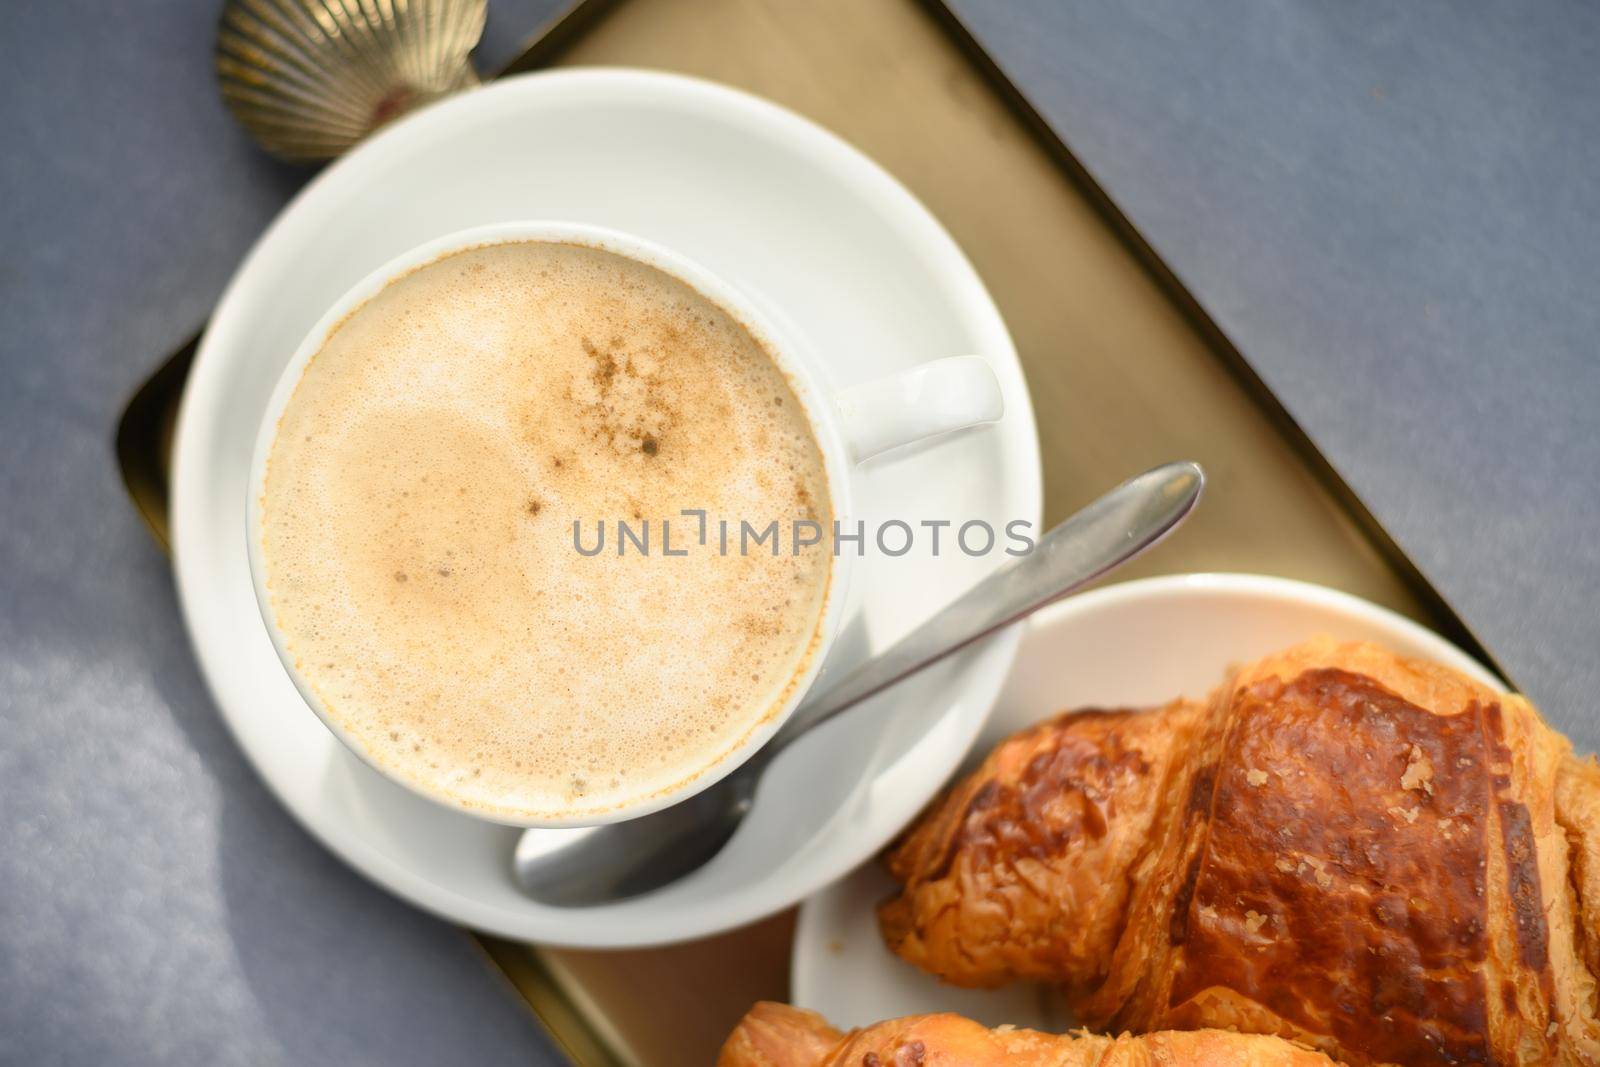 Coffee cup and fresh baked croissant by Ilianesolenyi